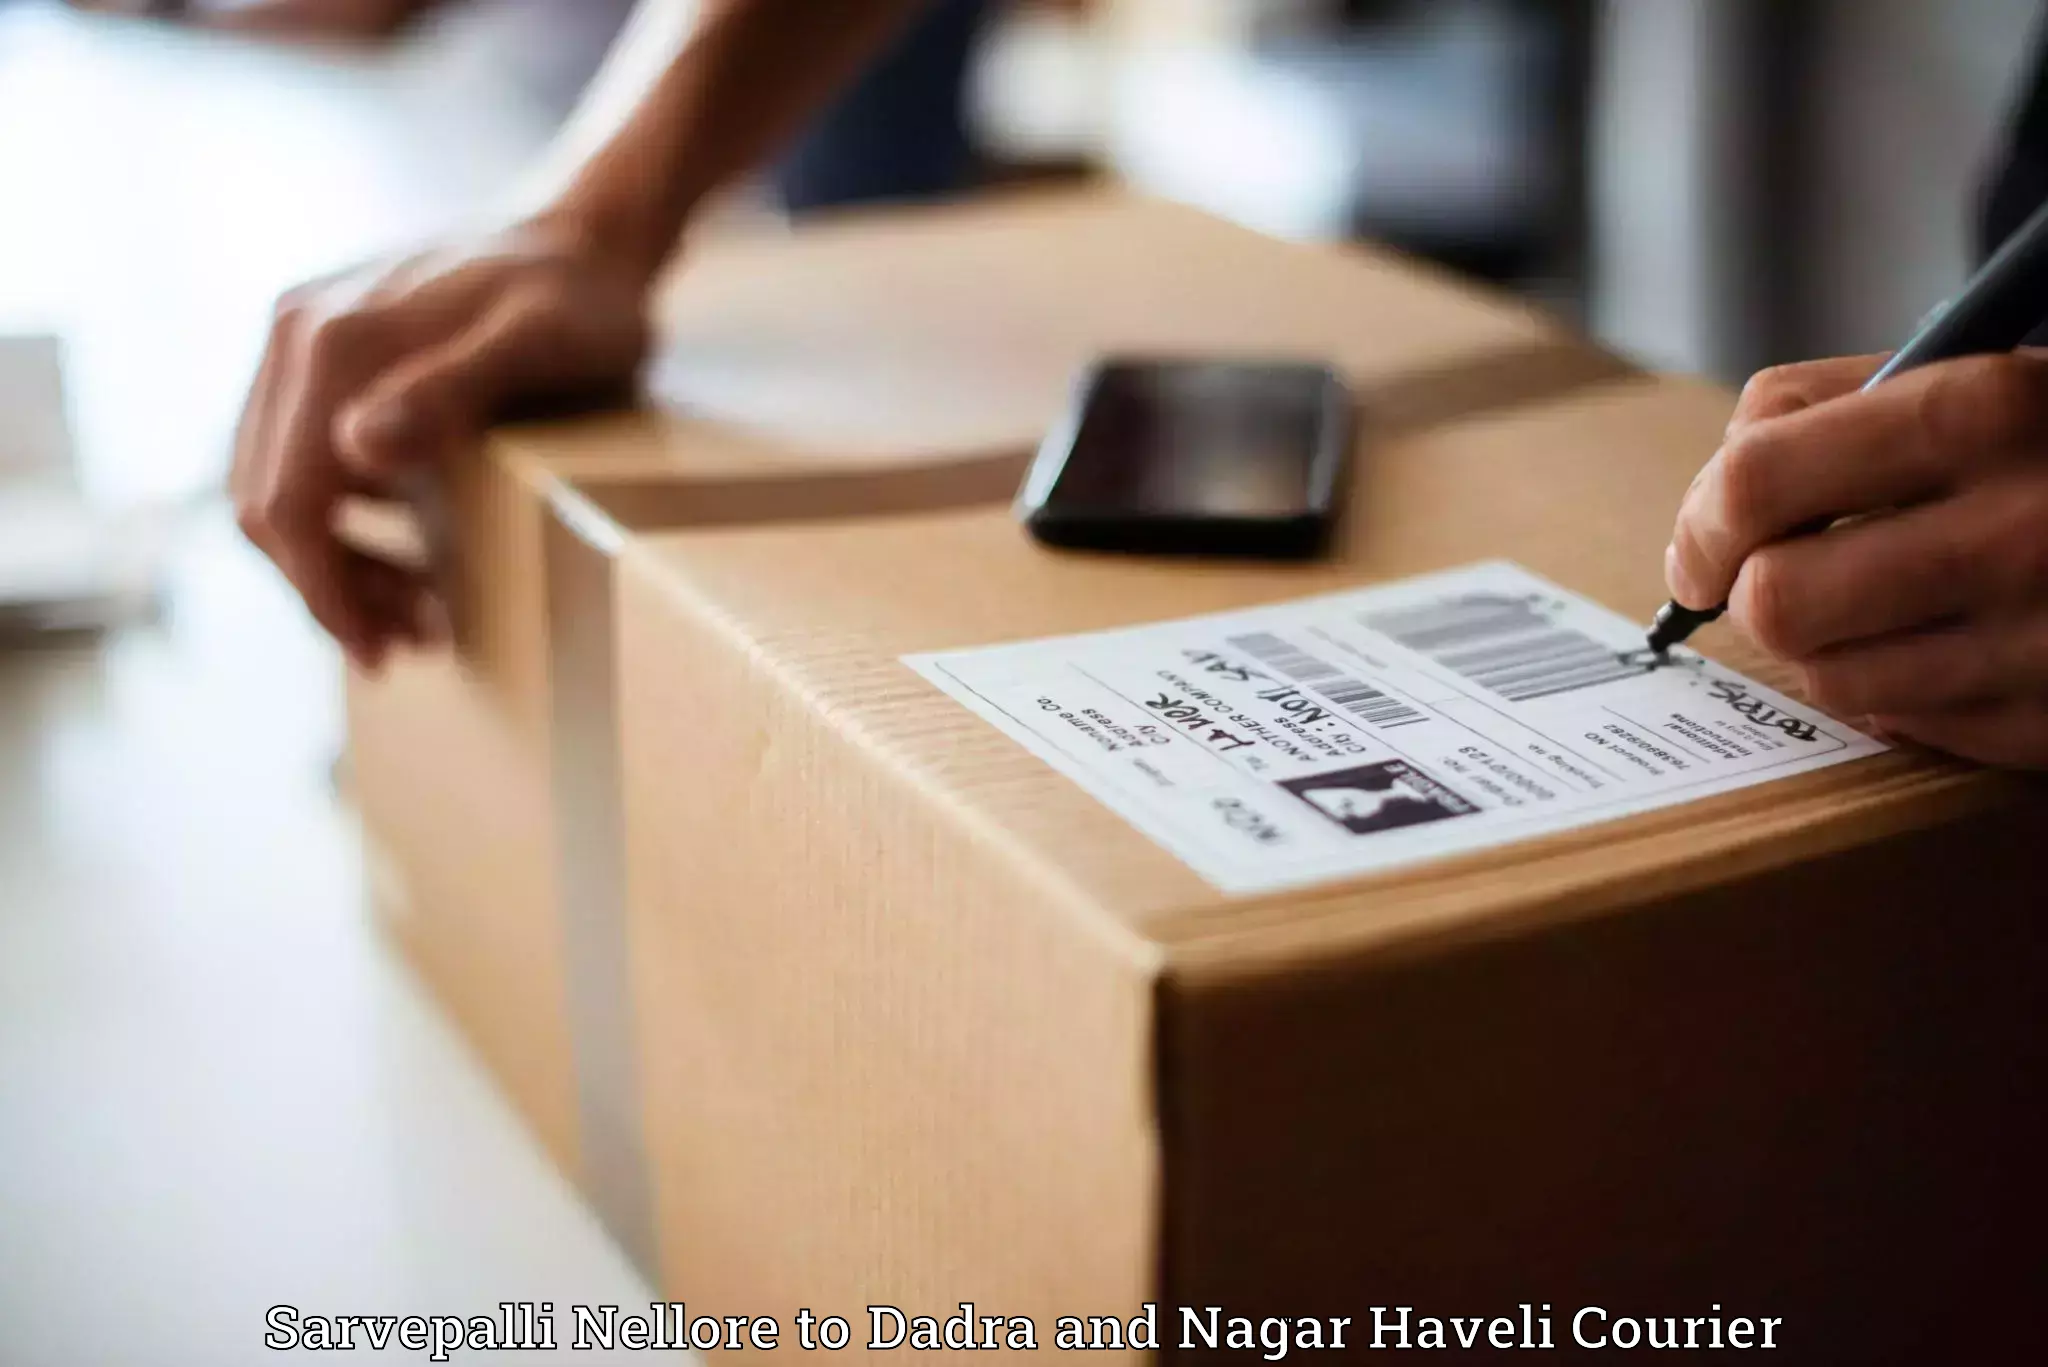 Fast-track shipping solutions Sarvepalli Nellore to Dadra and Nagar Haveli